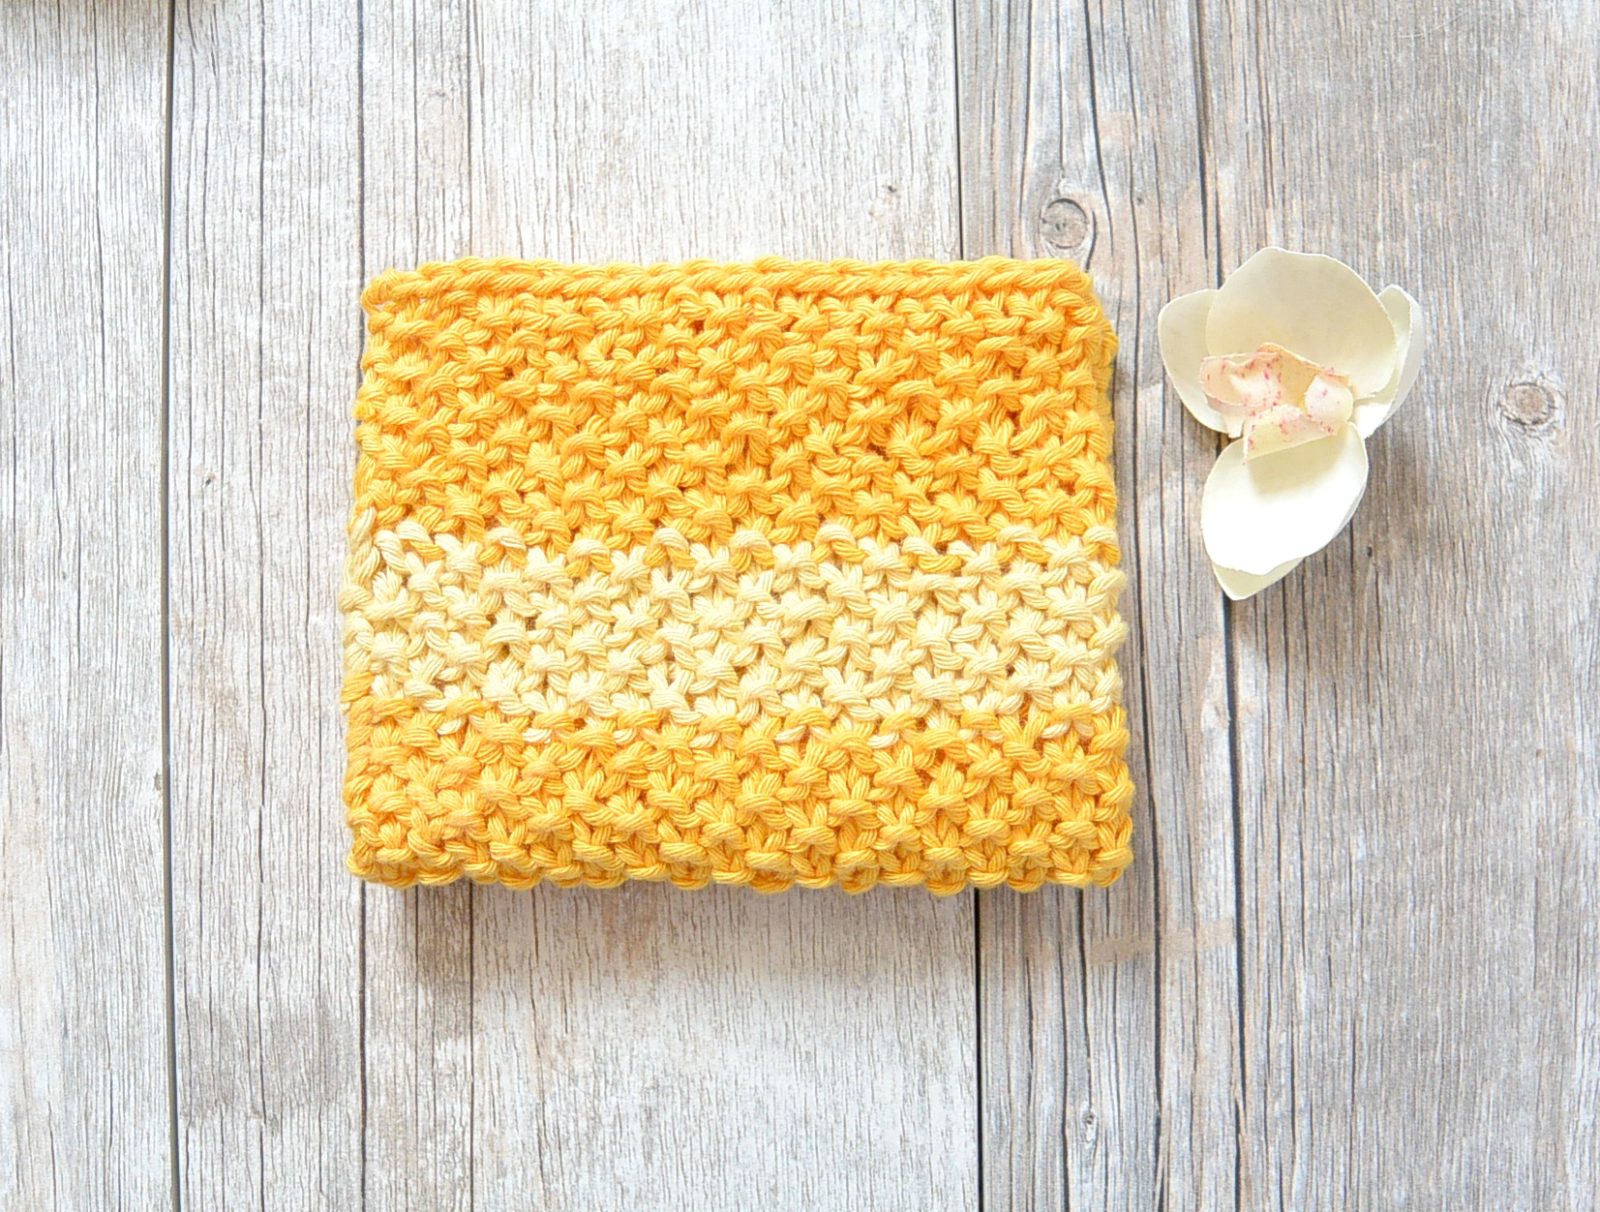 Free & Easy knitted dishcloth pattern for beginners [+video